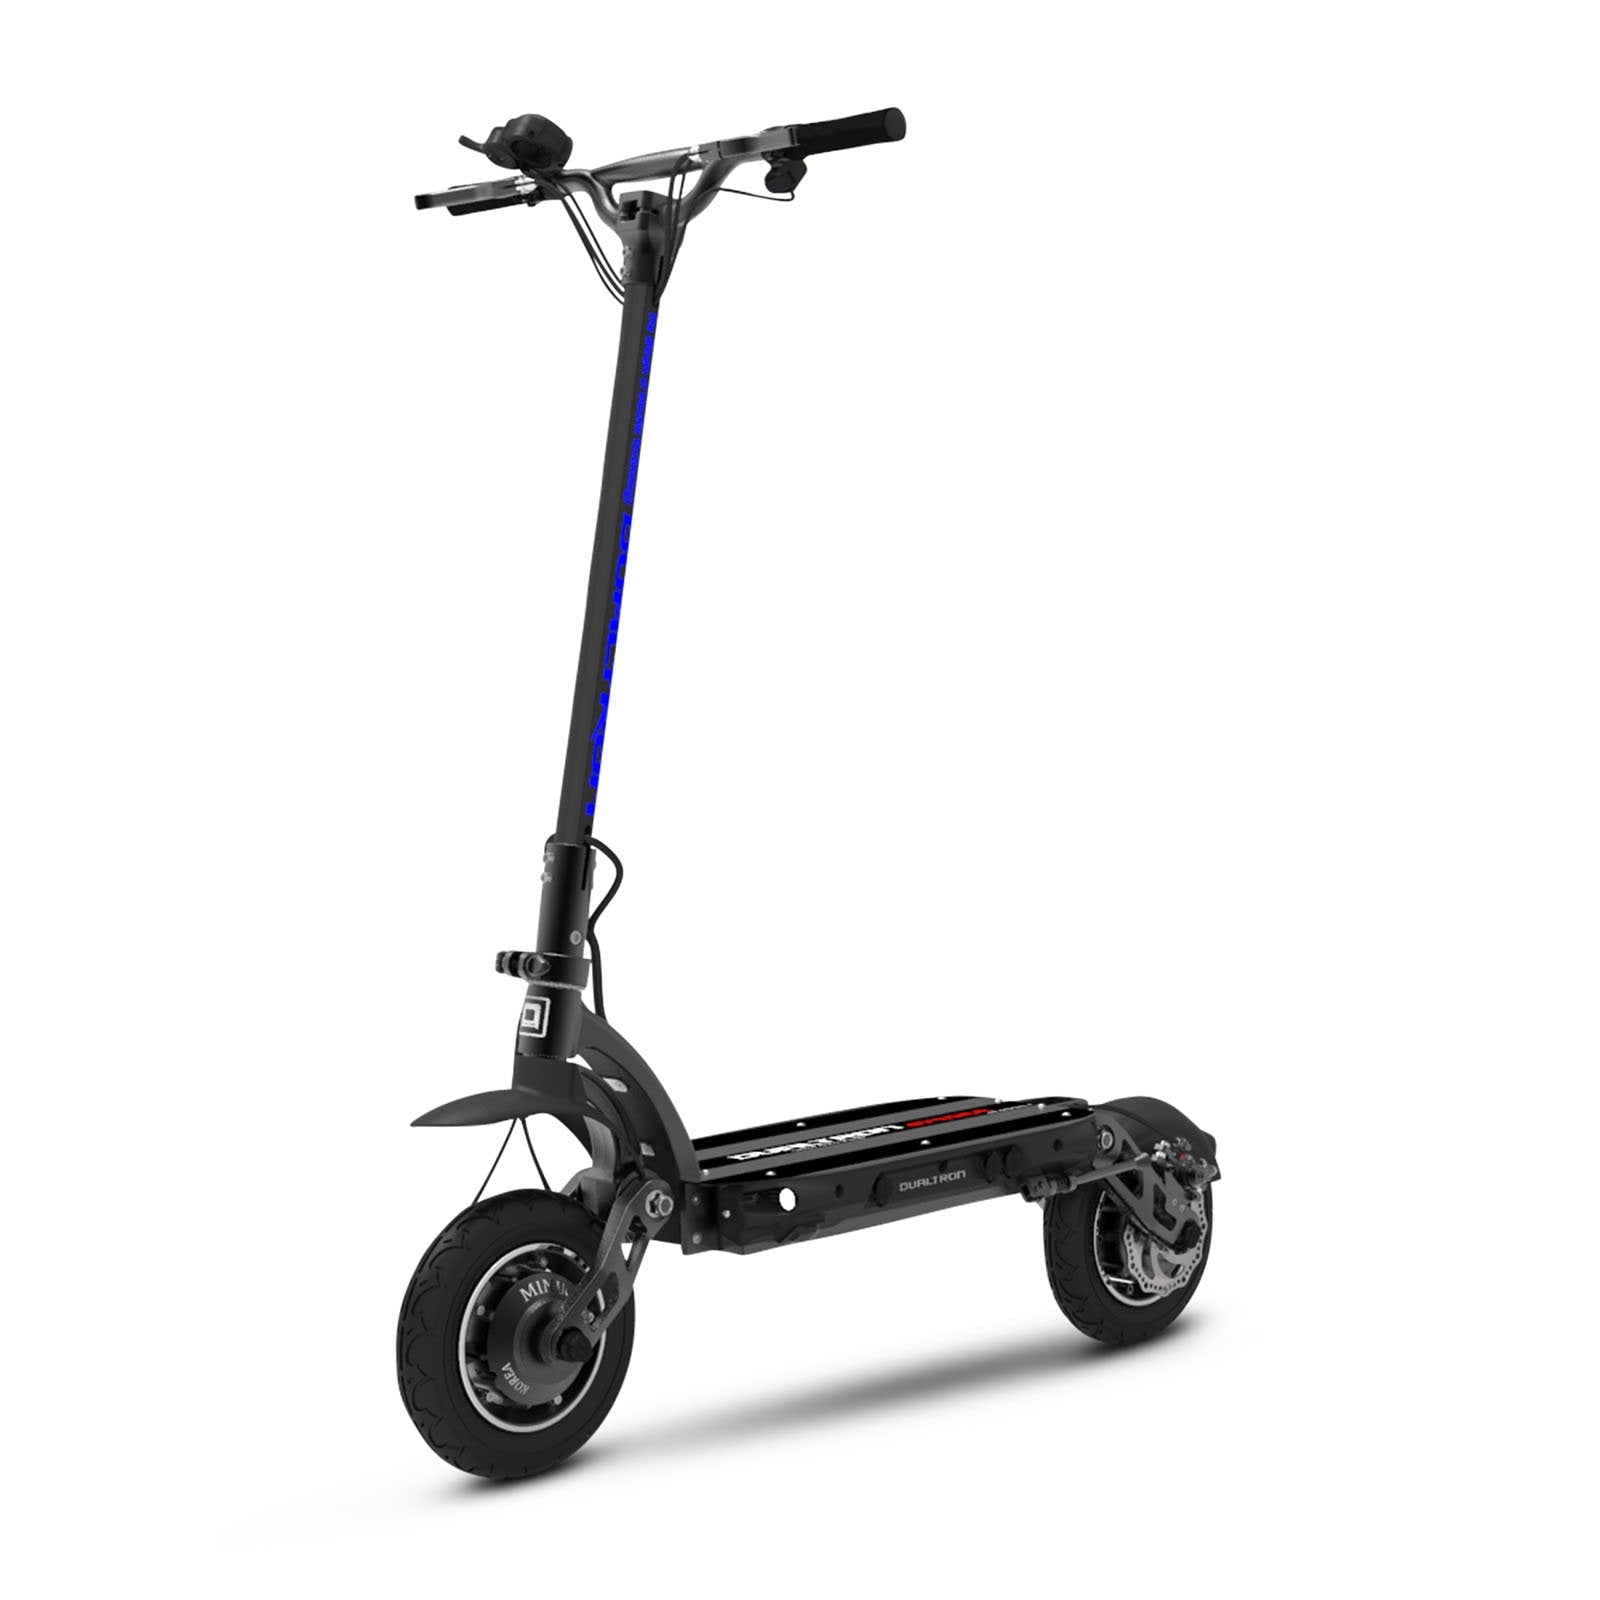 DUALTRON X2 UP - The Most Powerful Electric Scooter